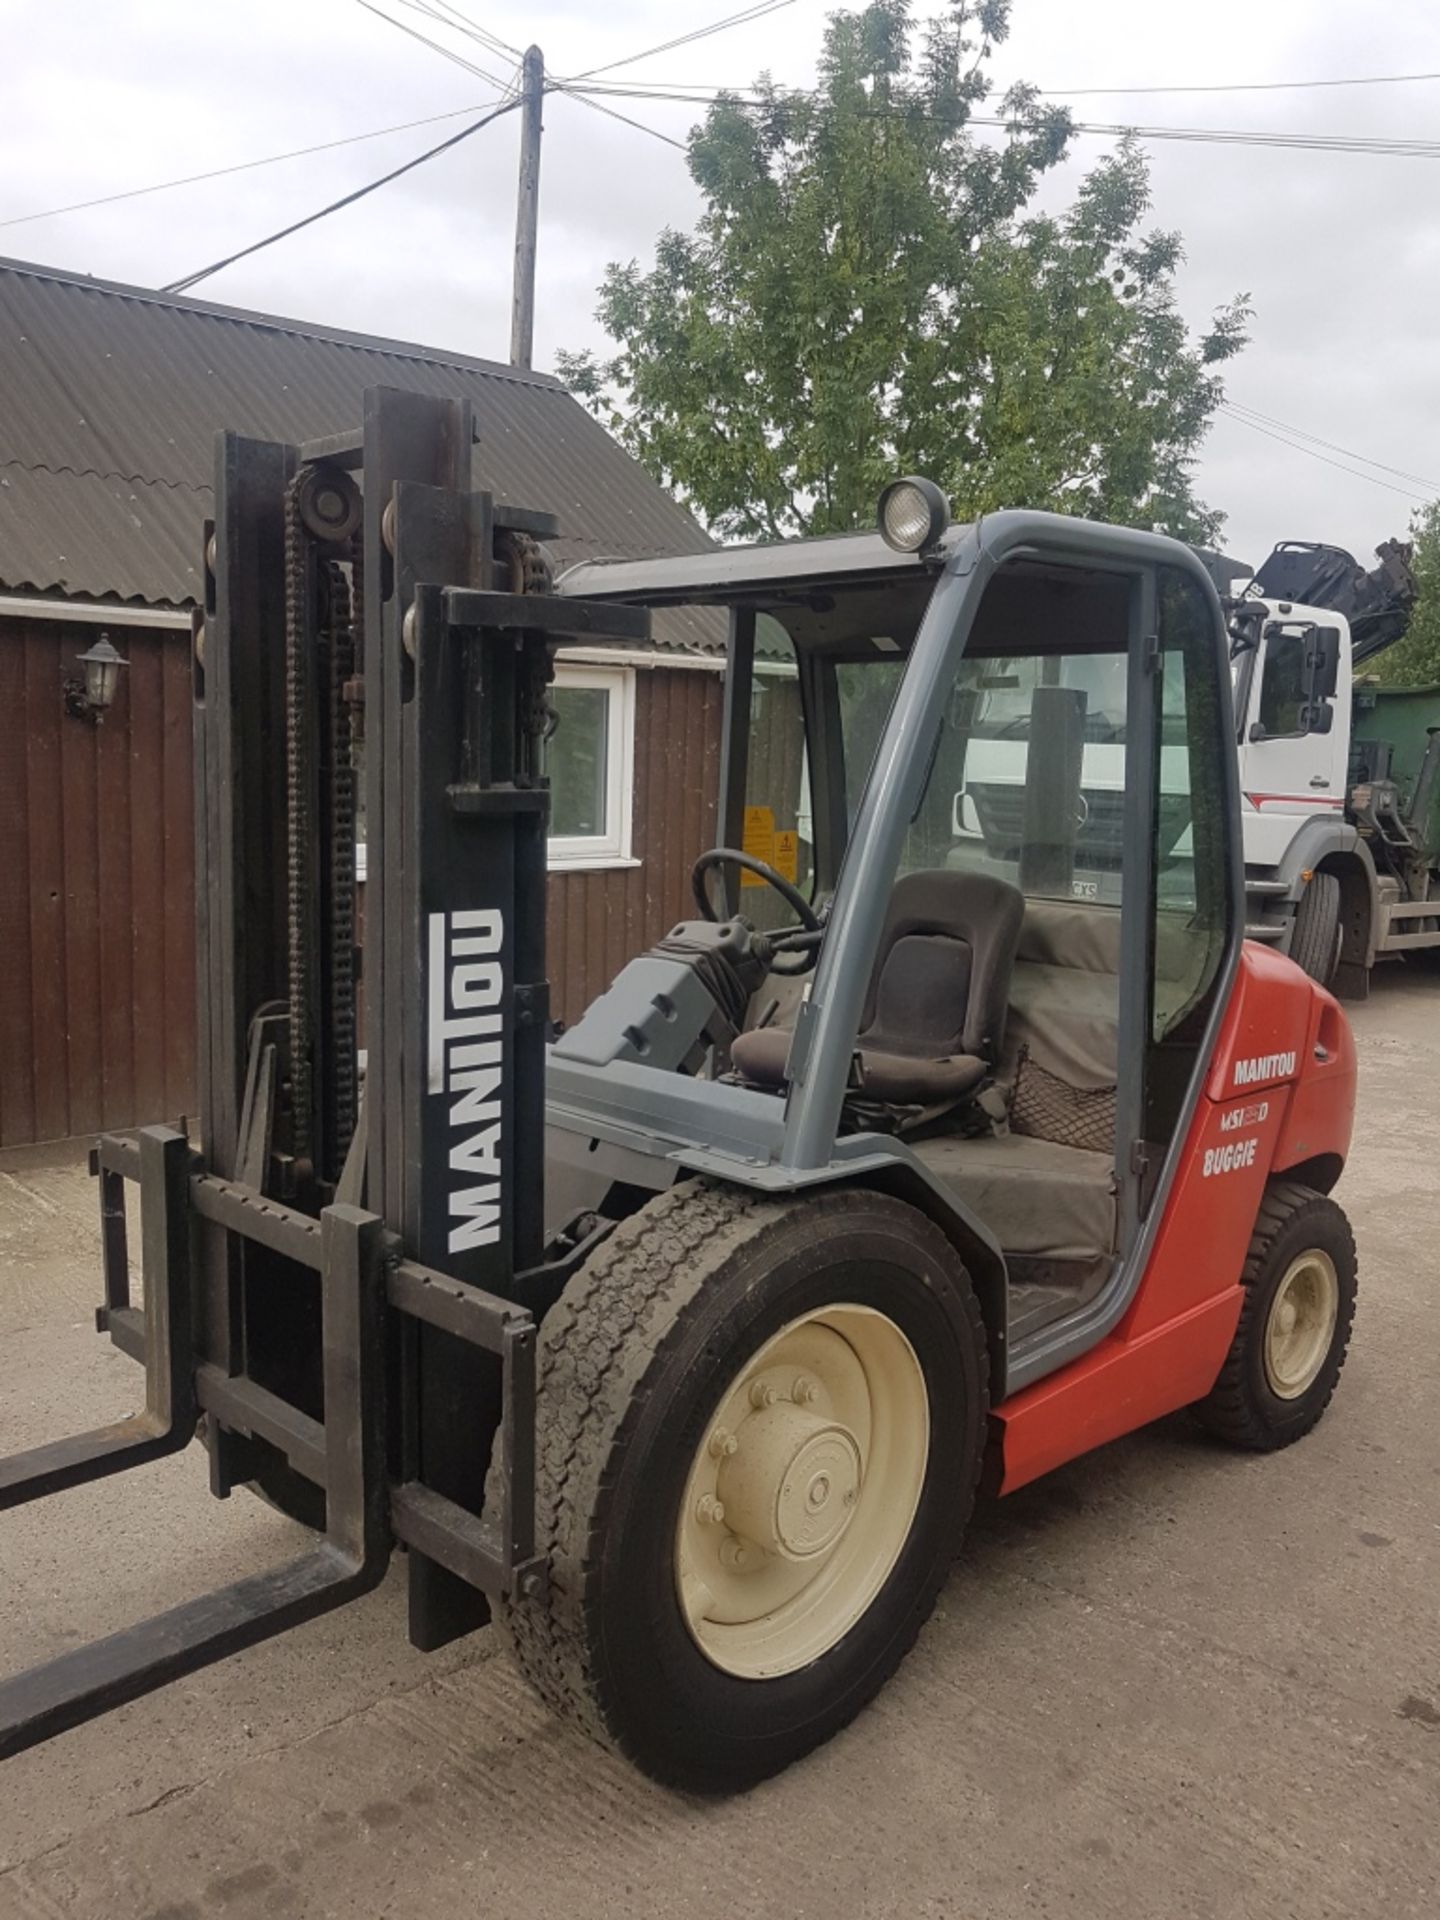 Manitou msi25d 2500 kgs diesel container spec forklift truck - Image 3 of 4